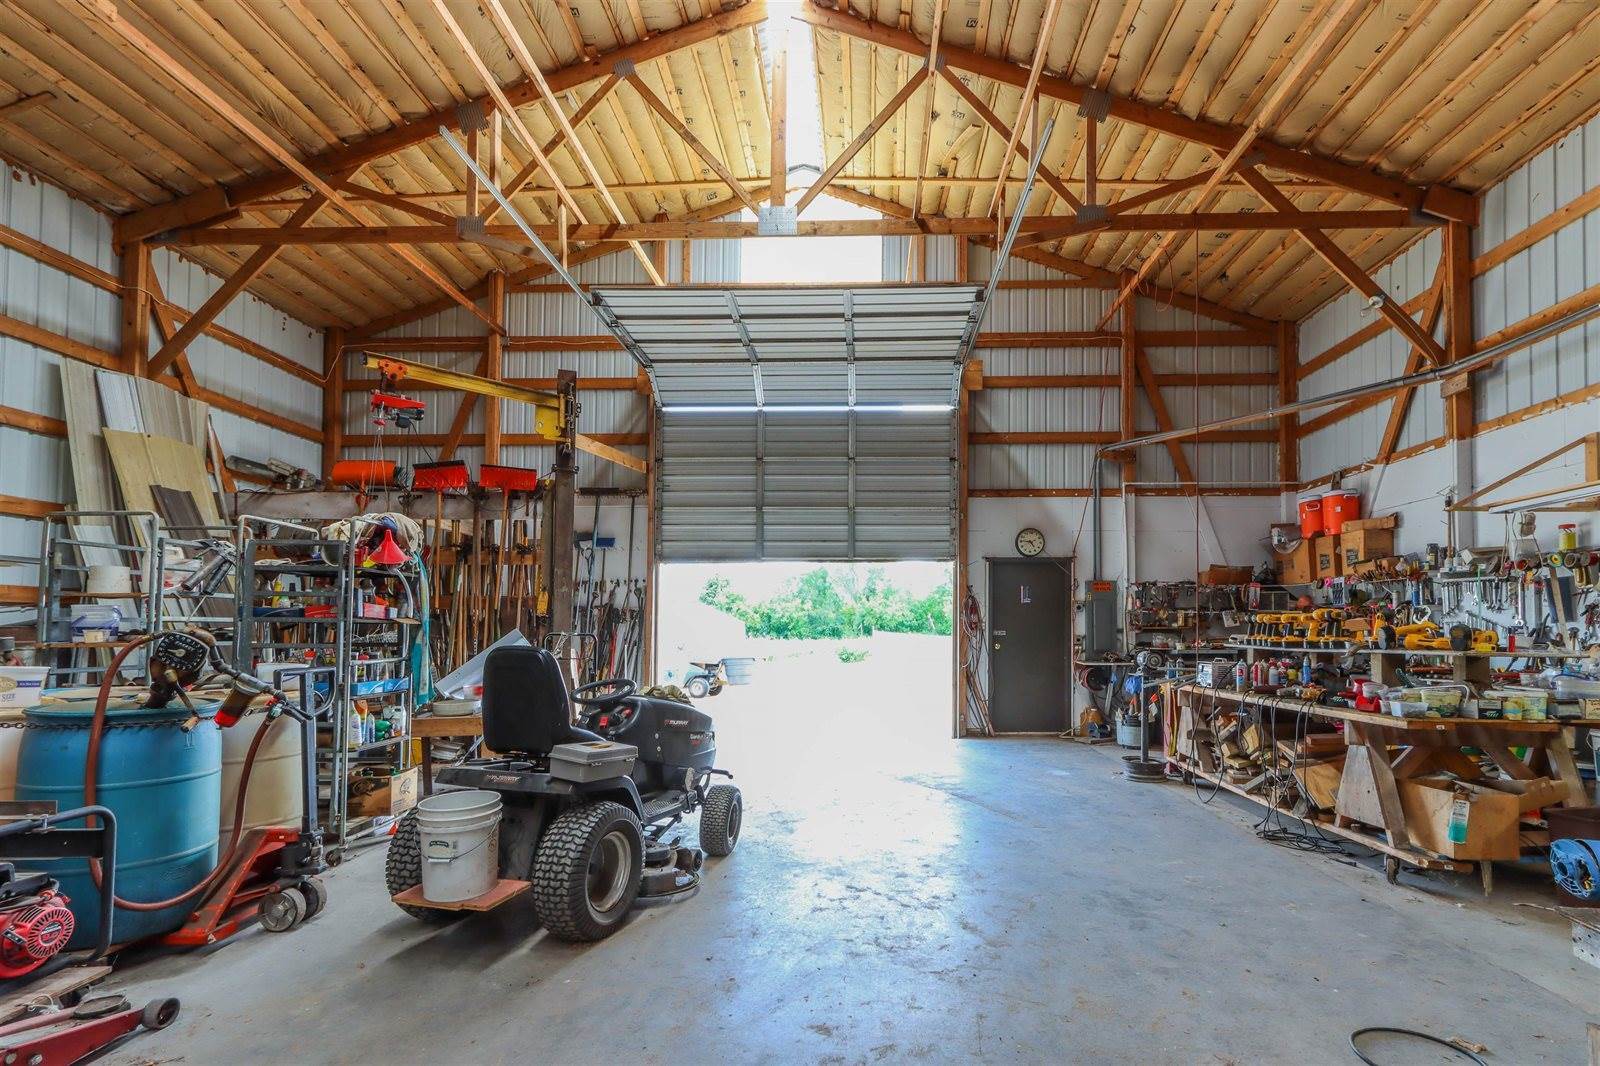 525 County Road J North, Custer, WI 54423